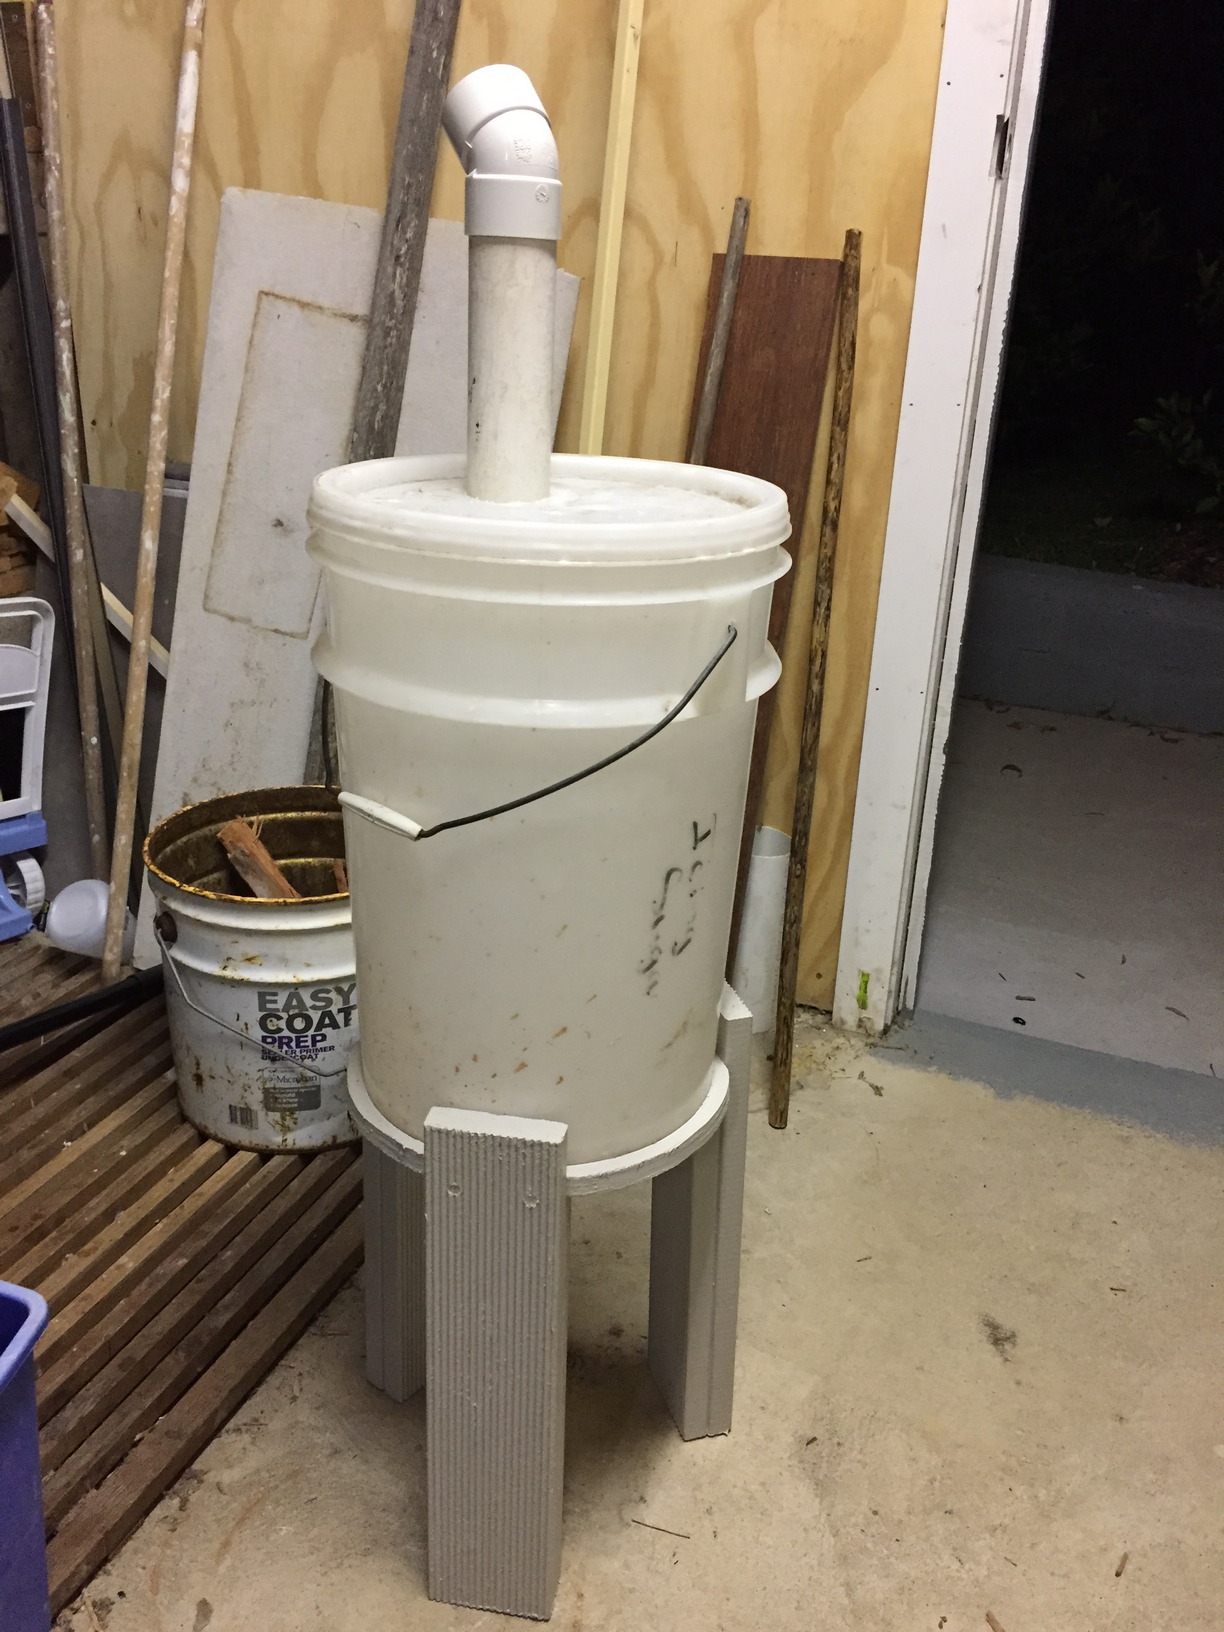 The water bucket sitting in the original stand